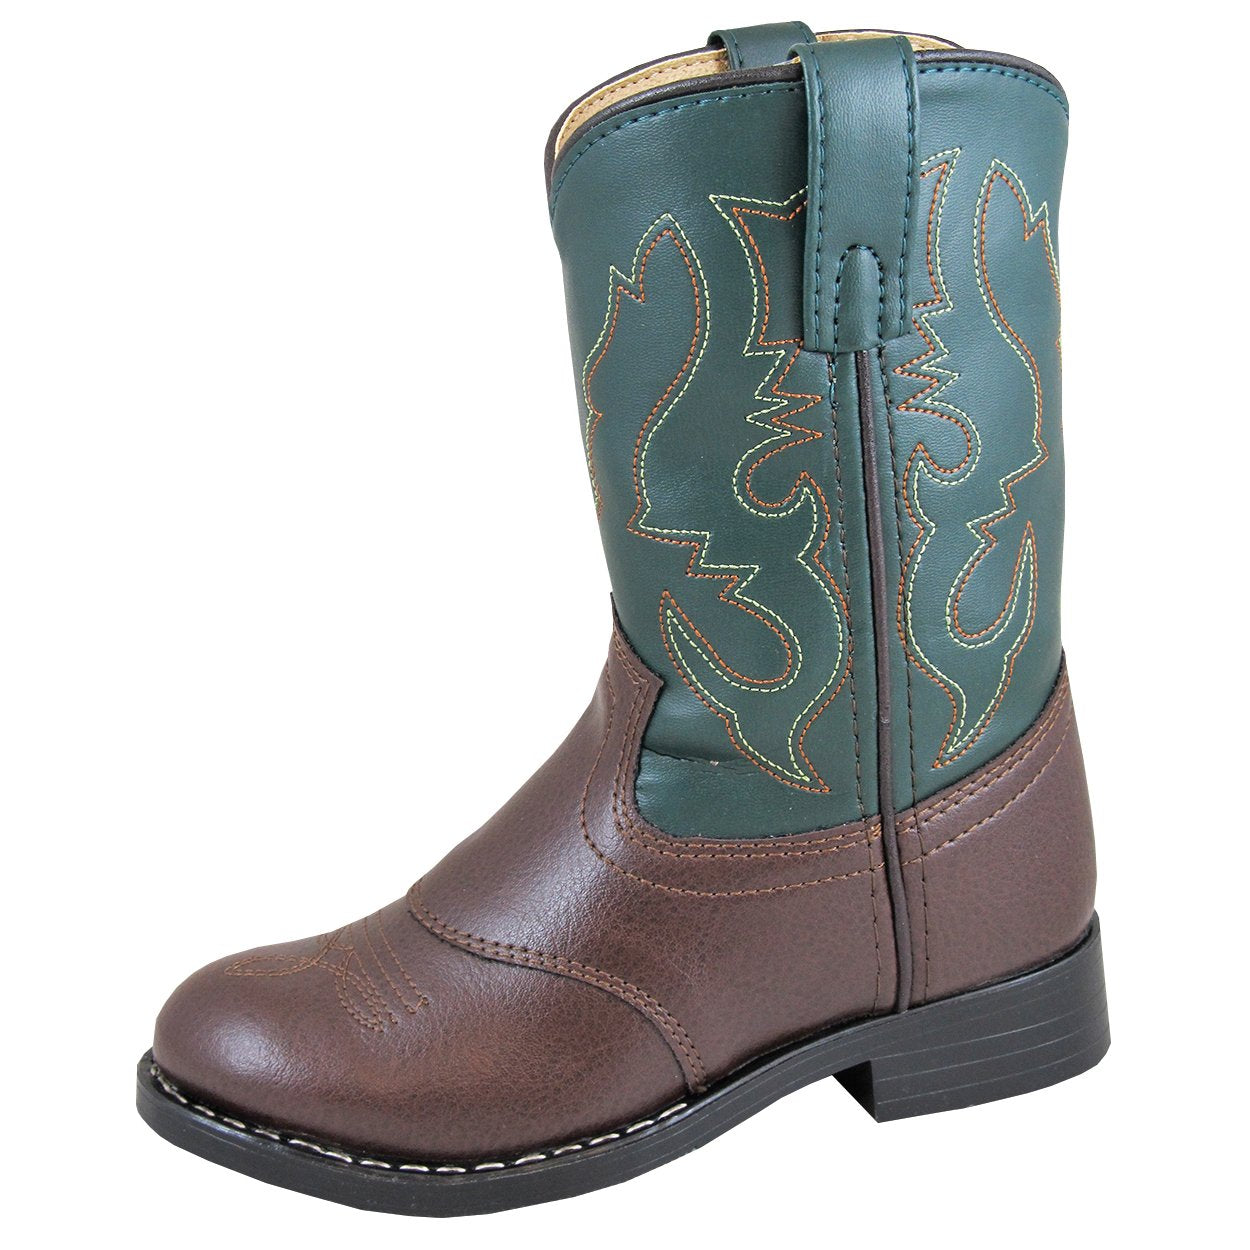 Smoky Mountain Youth Brown & Green Roper